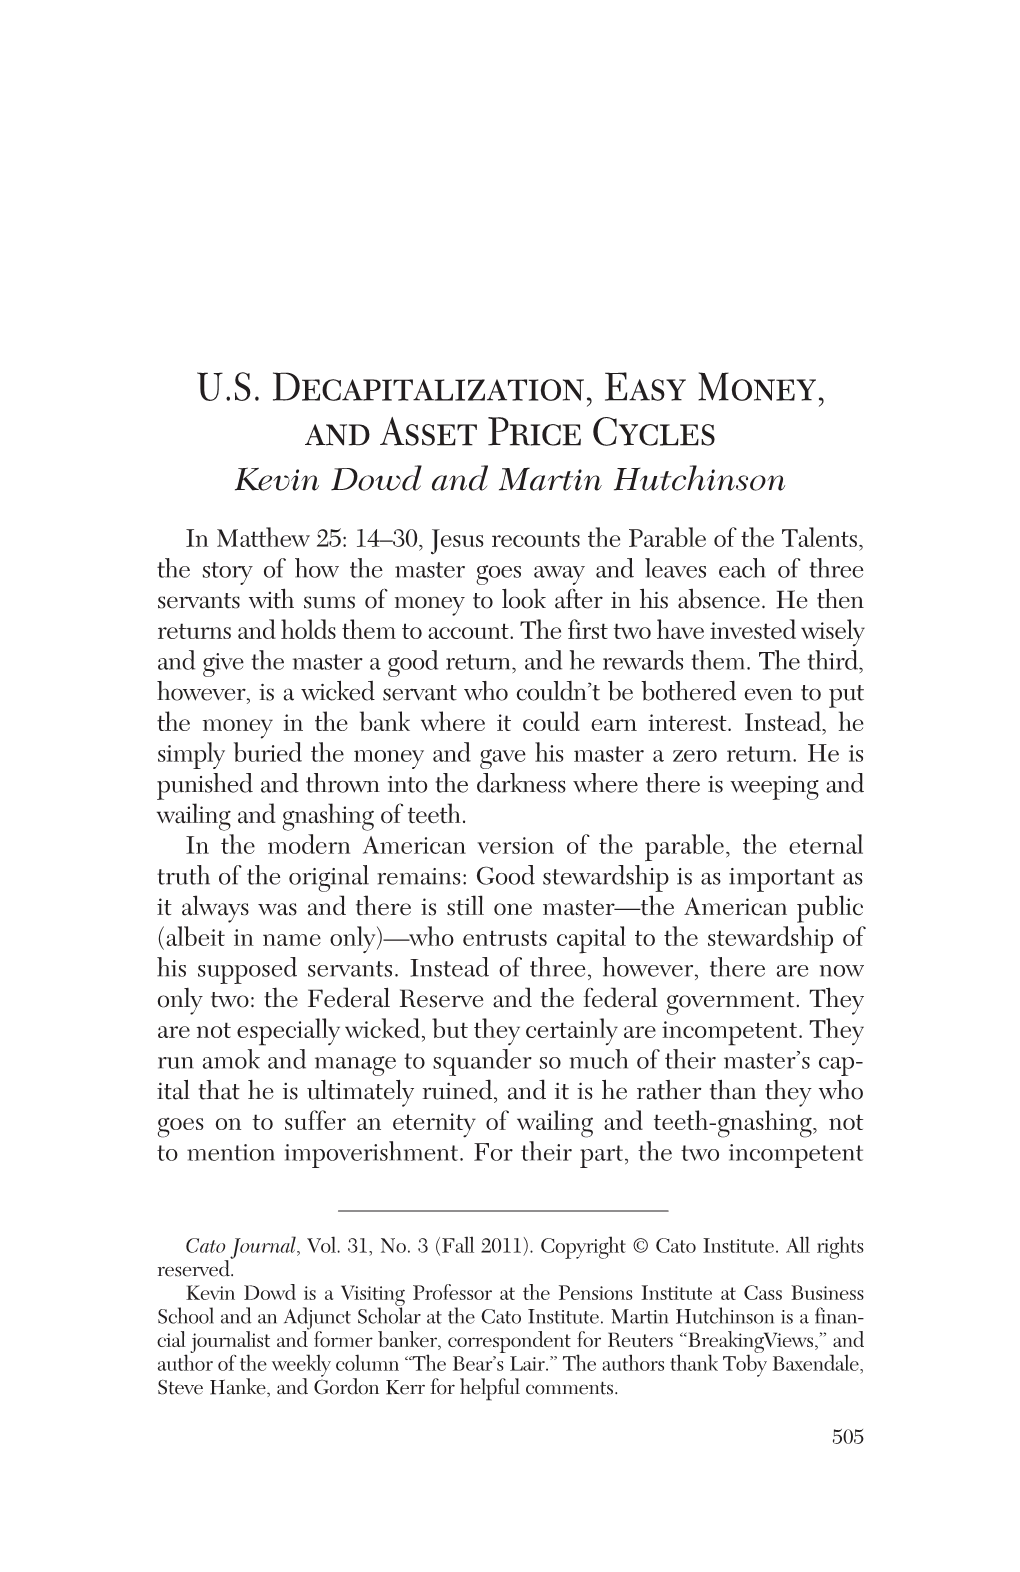 U.S. Decapitalization, Easy Money, and Asset Price Cycles Kevin Dowd and Martin Hutchinson